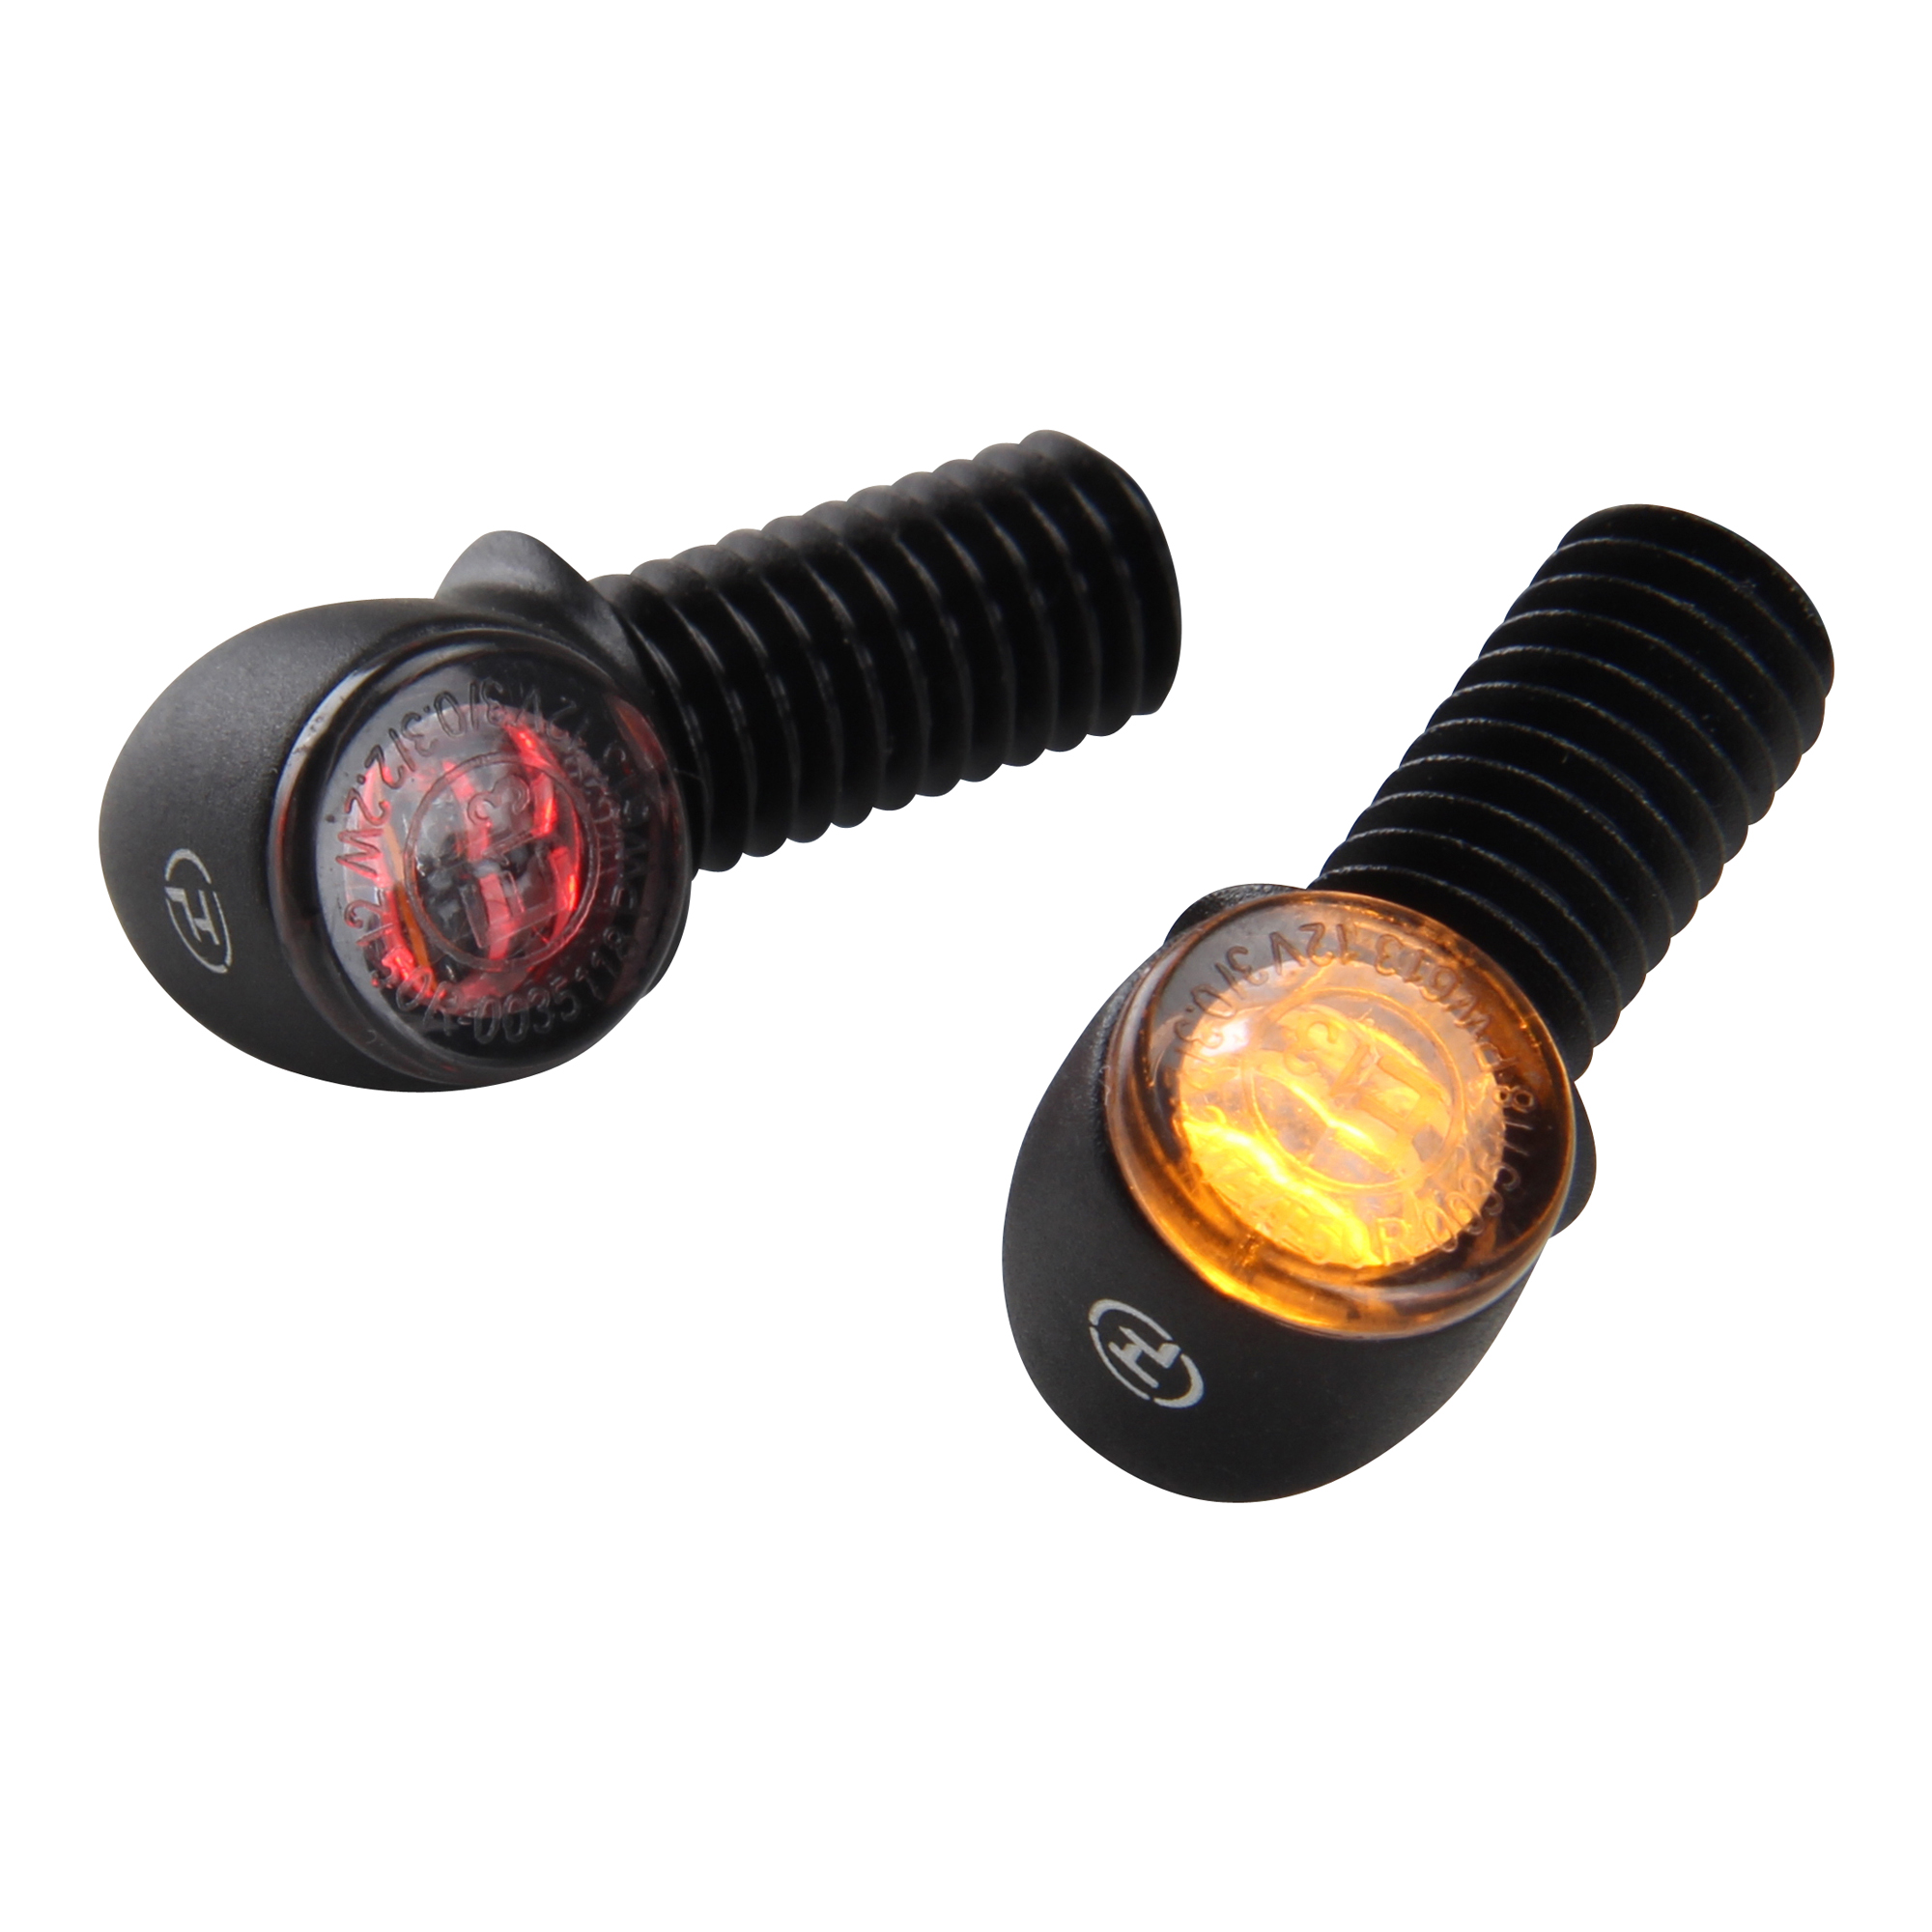 Highsider LED Proton TWO 3in1 turn signal / taillight / brake